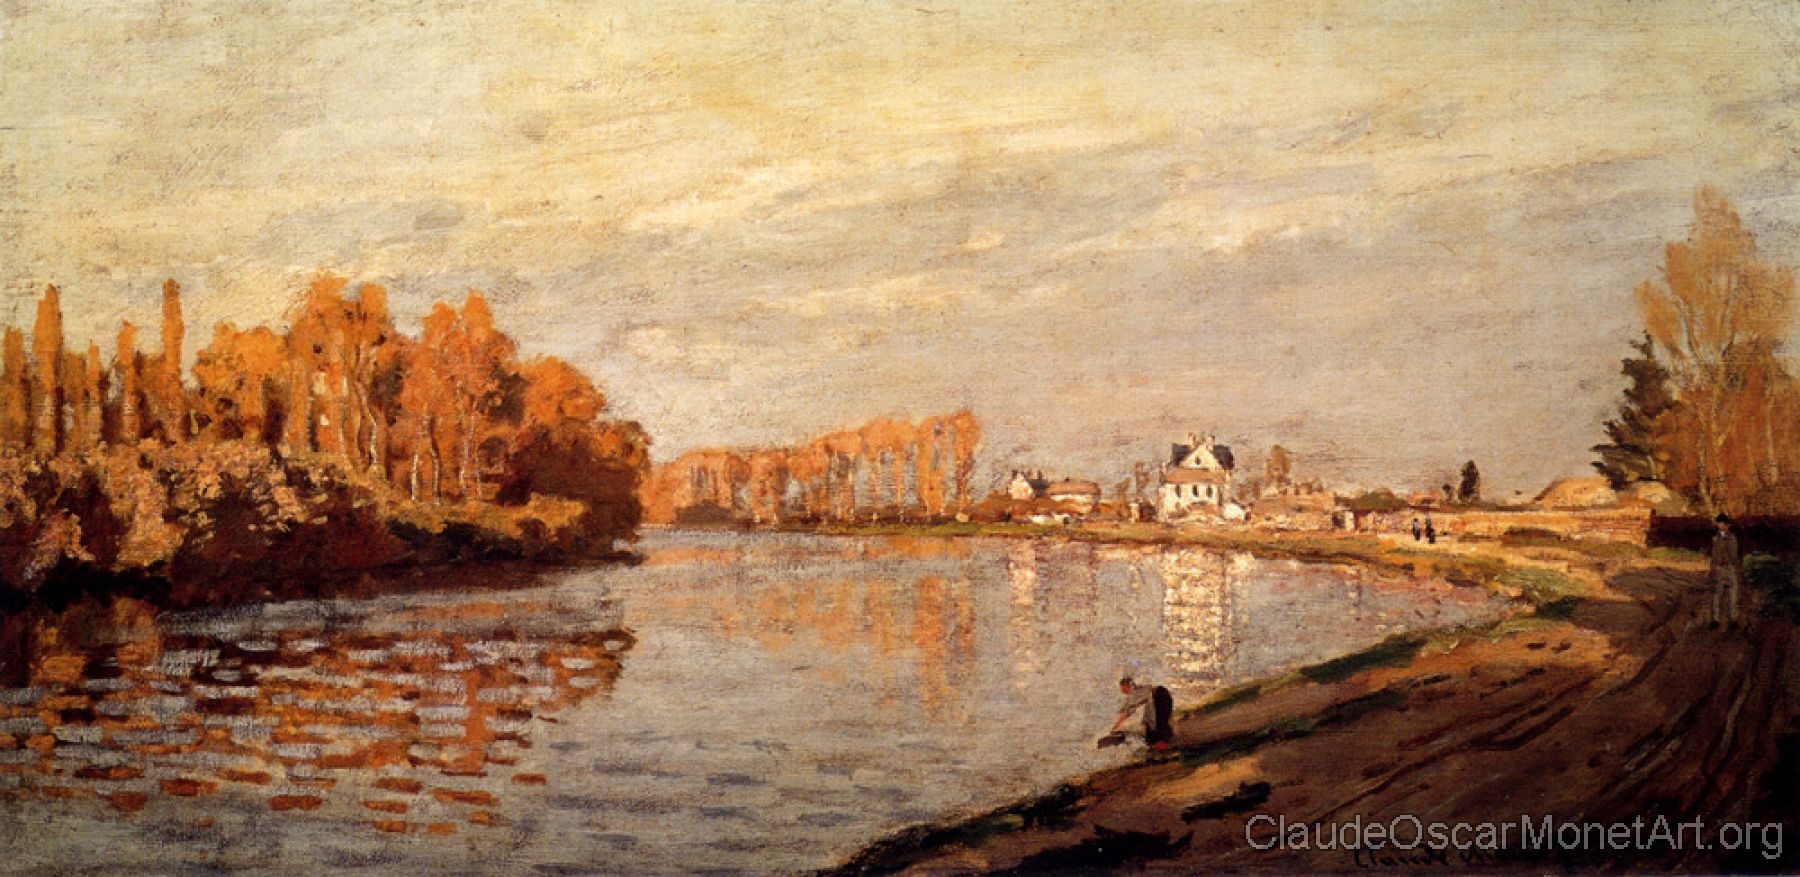 The Seine At Argenteuil